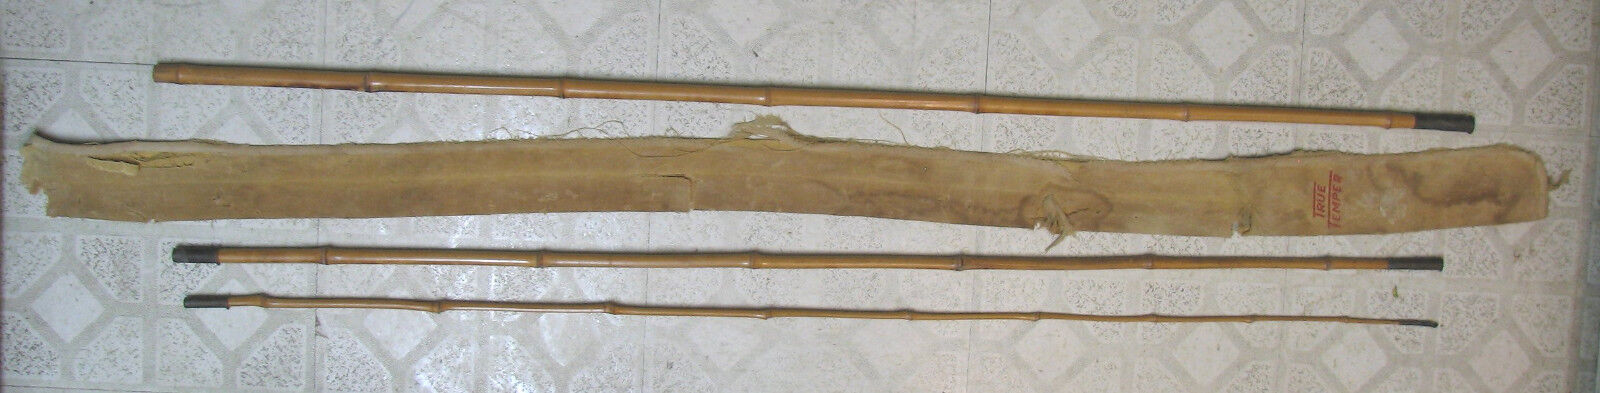 VINTAGE True Value Bamboo Cane Fishing Pole - 12\' - VERY NICE